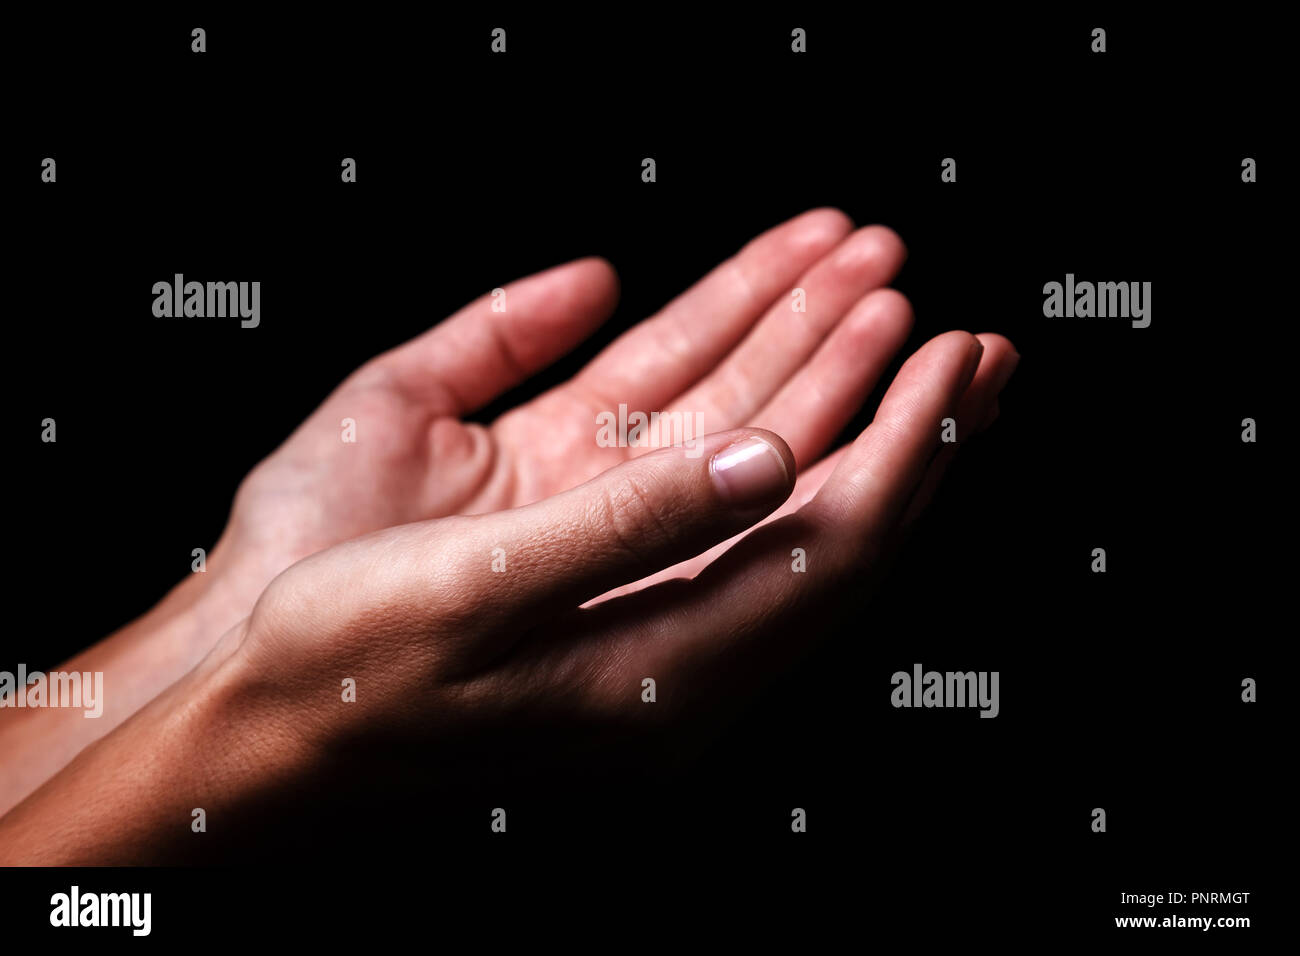 Female hands praying with palms up arms outstretched. Black background. Close up of woman hand. Concept for prayer, faith, religion, religious, worshi Stock Photo